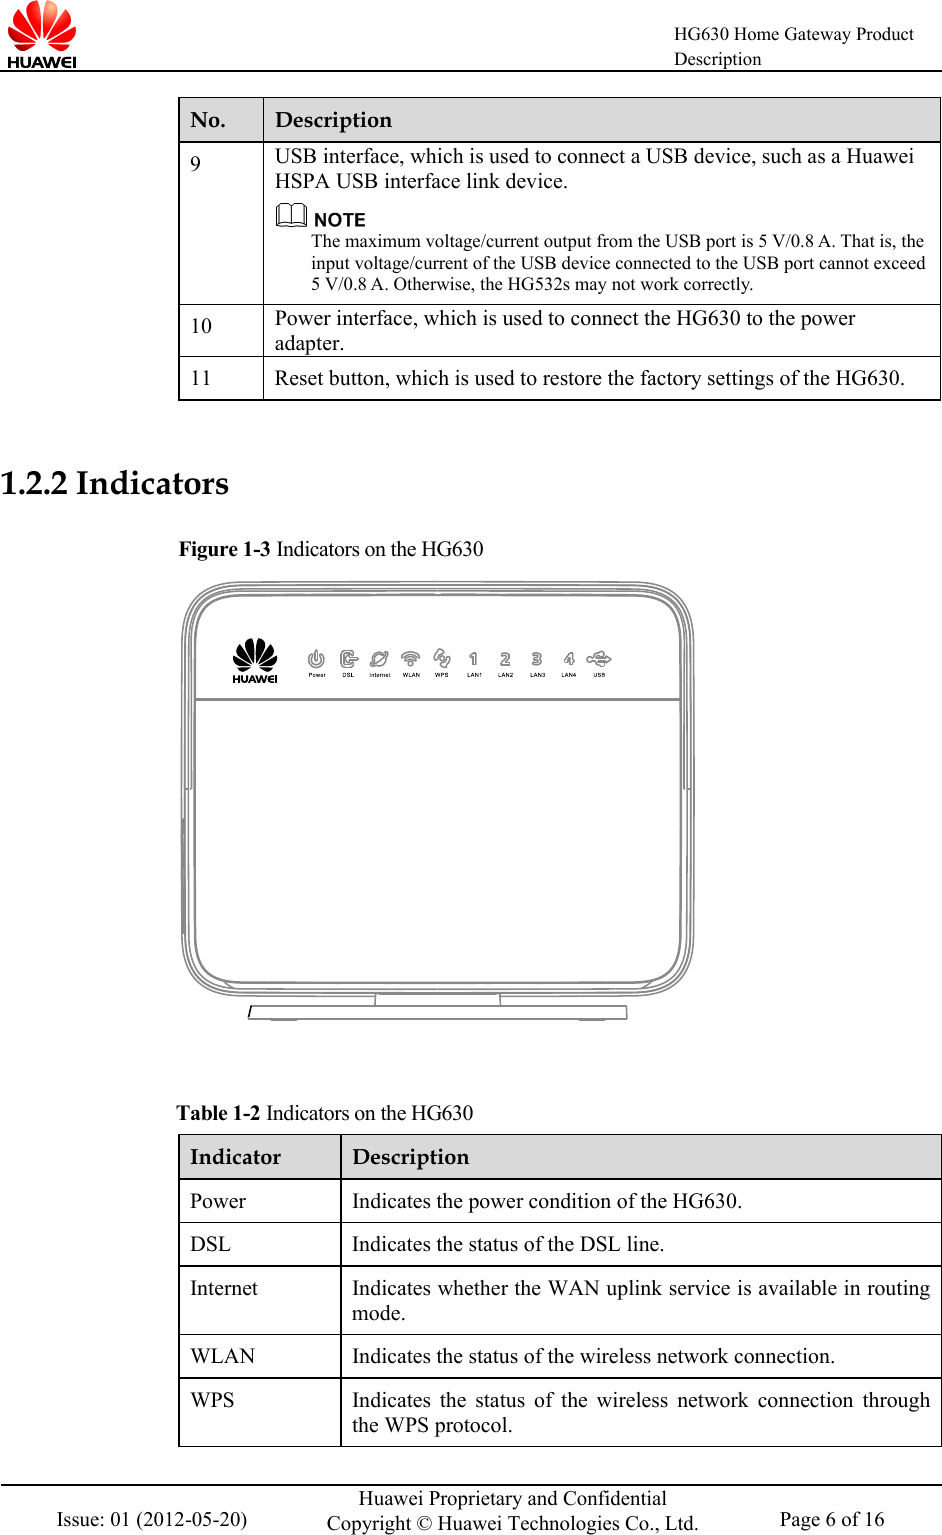    HG630 Home Gateway Product Description  Issue: 01 (2012-05-20) Huawei Proprietary and Confidential Copyright © Huawei Technologies Co., Ltd. Page 6 of 16  No. Description 9 USB interface, which is used to connect a USB device, such as a Huawei HSPA USB interface link device.    The maximum voltage/current output from the USB port is 5 V/0.8 A. That is, the input voltage/current of the USB device connected to the USB port cannot exceed 5 V/0.8 A. Otherwise, the HG532s may not work correctly. 10 Power interface, which is used to connect the HG630 to the power adapter. 11  Reset button, which is used to restore the factory settings of the HG630.  1.2.2 Indicators Figure 1-3 Indicators on the HG630   Table 1-2 Indicators on the HG630 Indicator Description Power  Indicates the power condition of the HG630. DSL  Indicates the status of the DSL line. Internet  Indicates whether the WAN uplink service is available in routing mode. WLAN  Indicates the status of the wireless network connection. WPS  Indicates  the status of the wireless network connection  through the WPS protocol. 